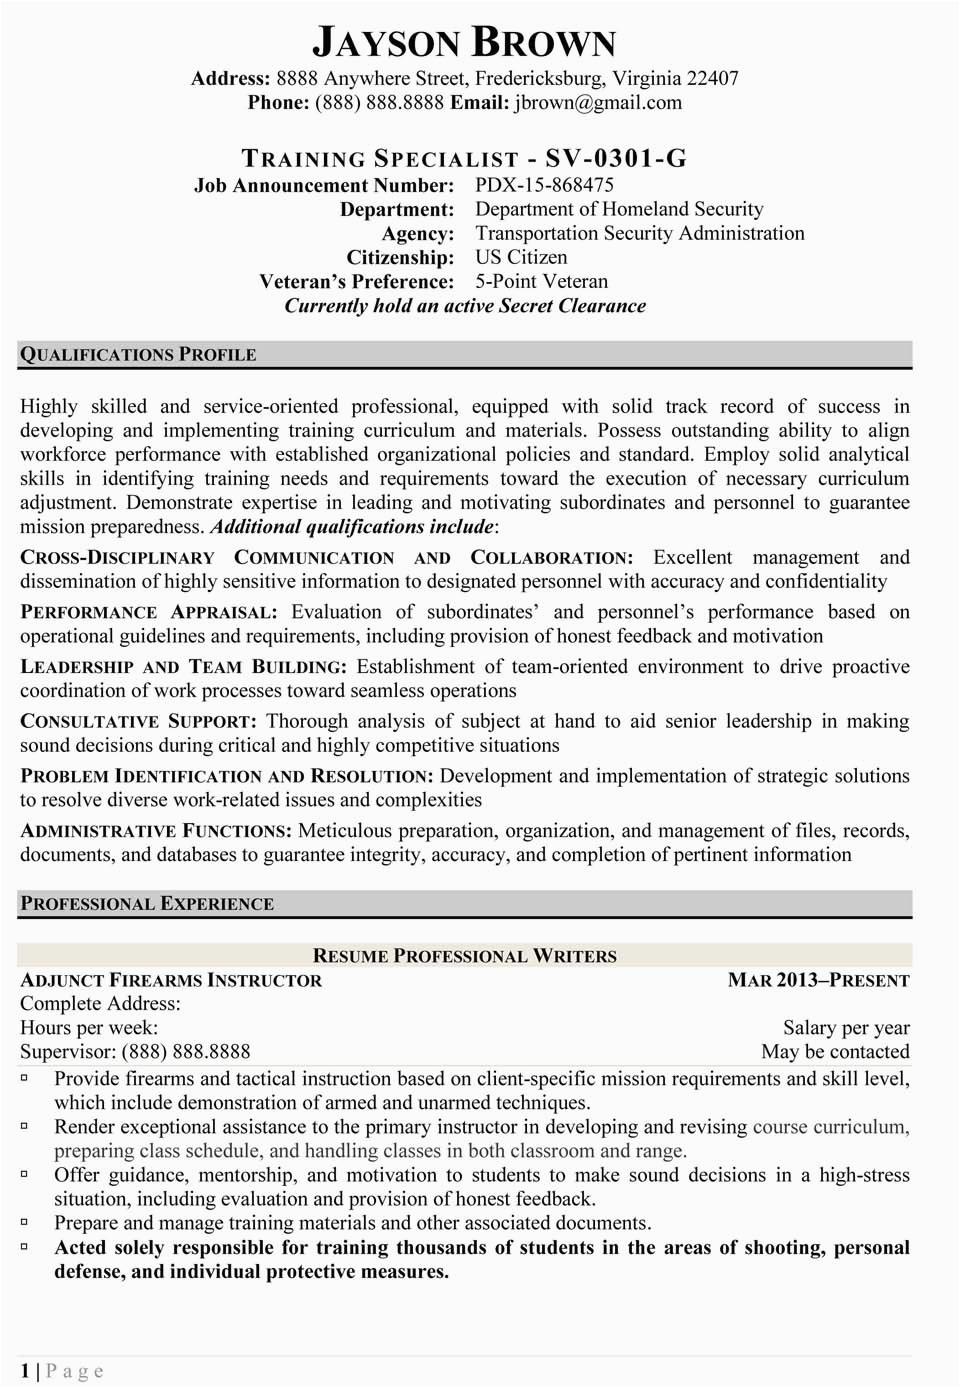 Sample Federal Resume for Program Specialist Federal Resume Writing Service Resume Professional Writers